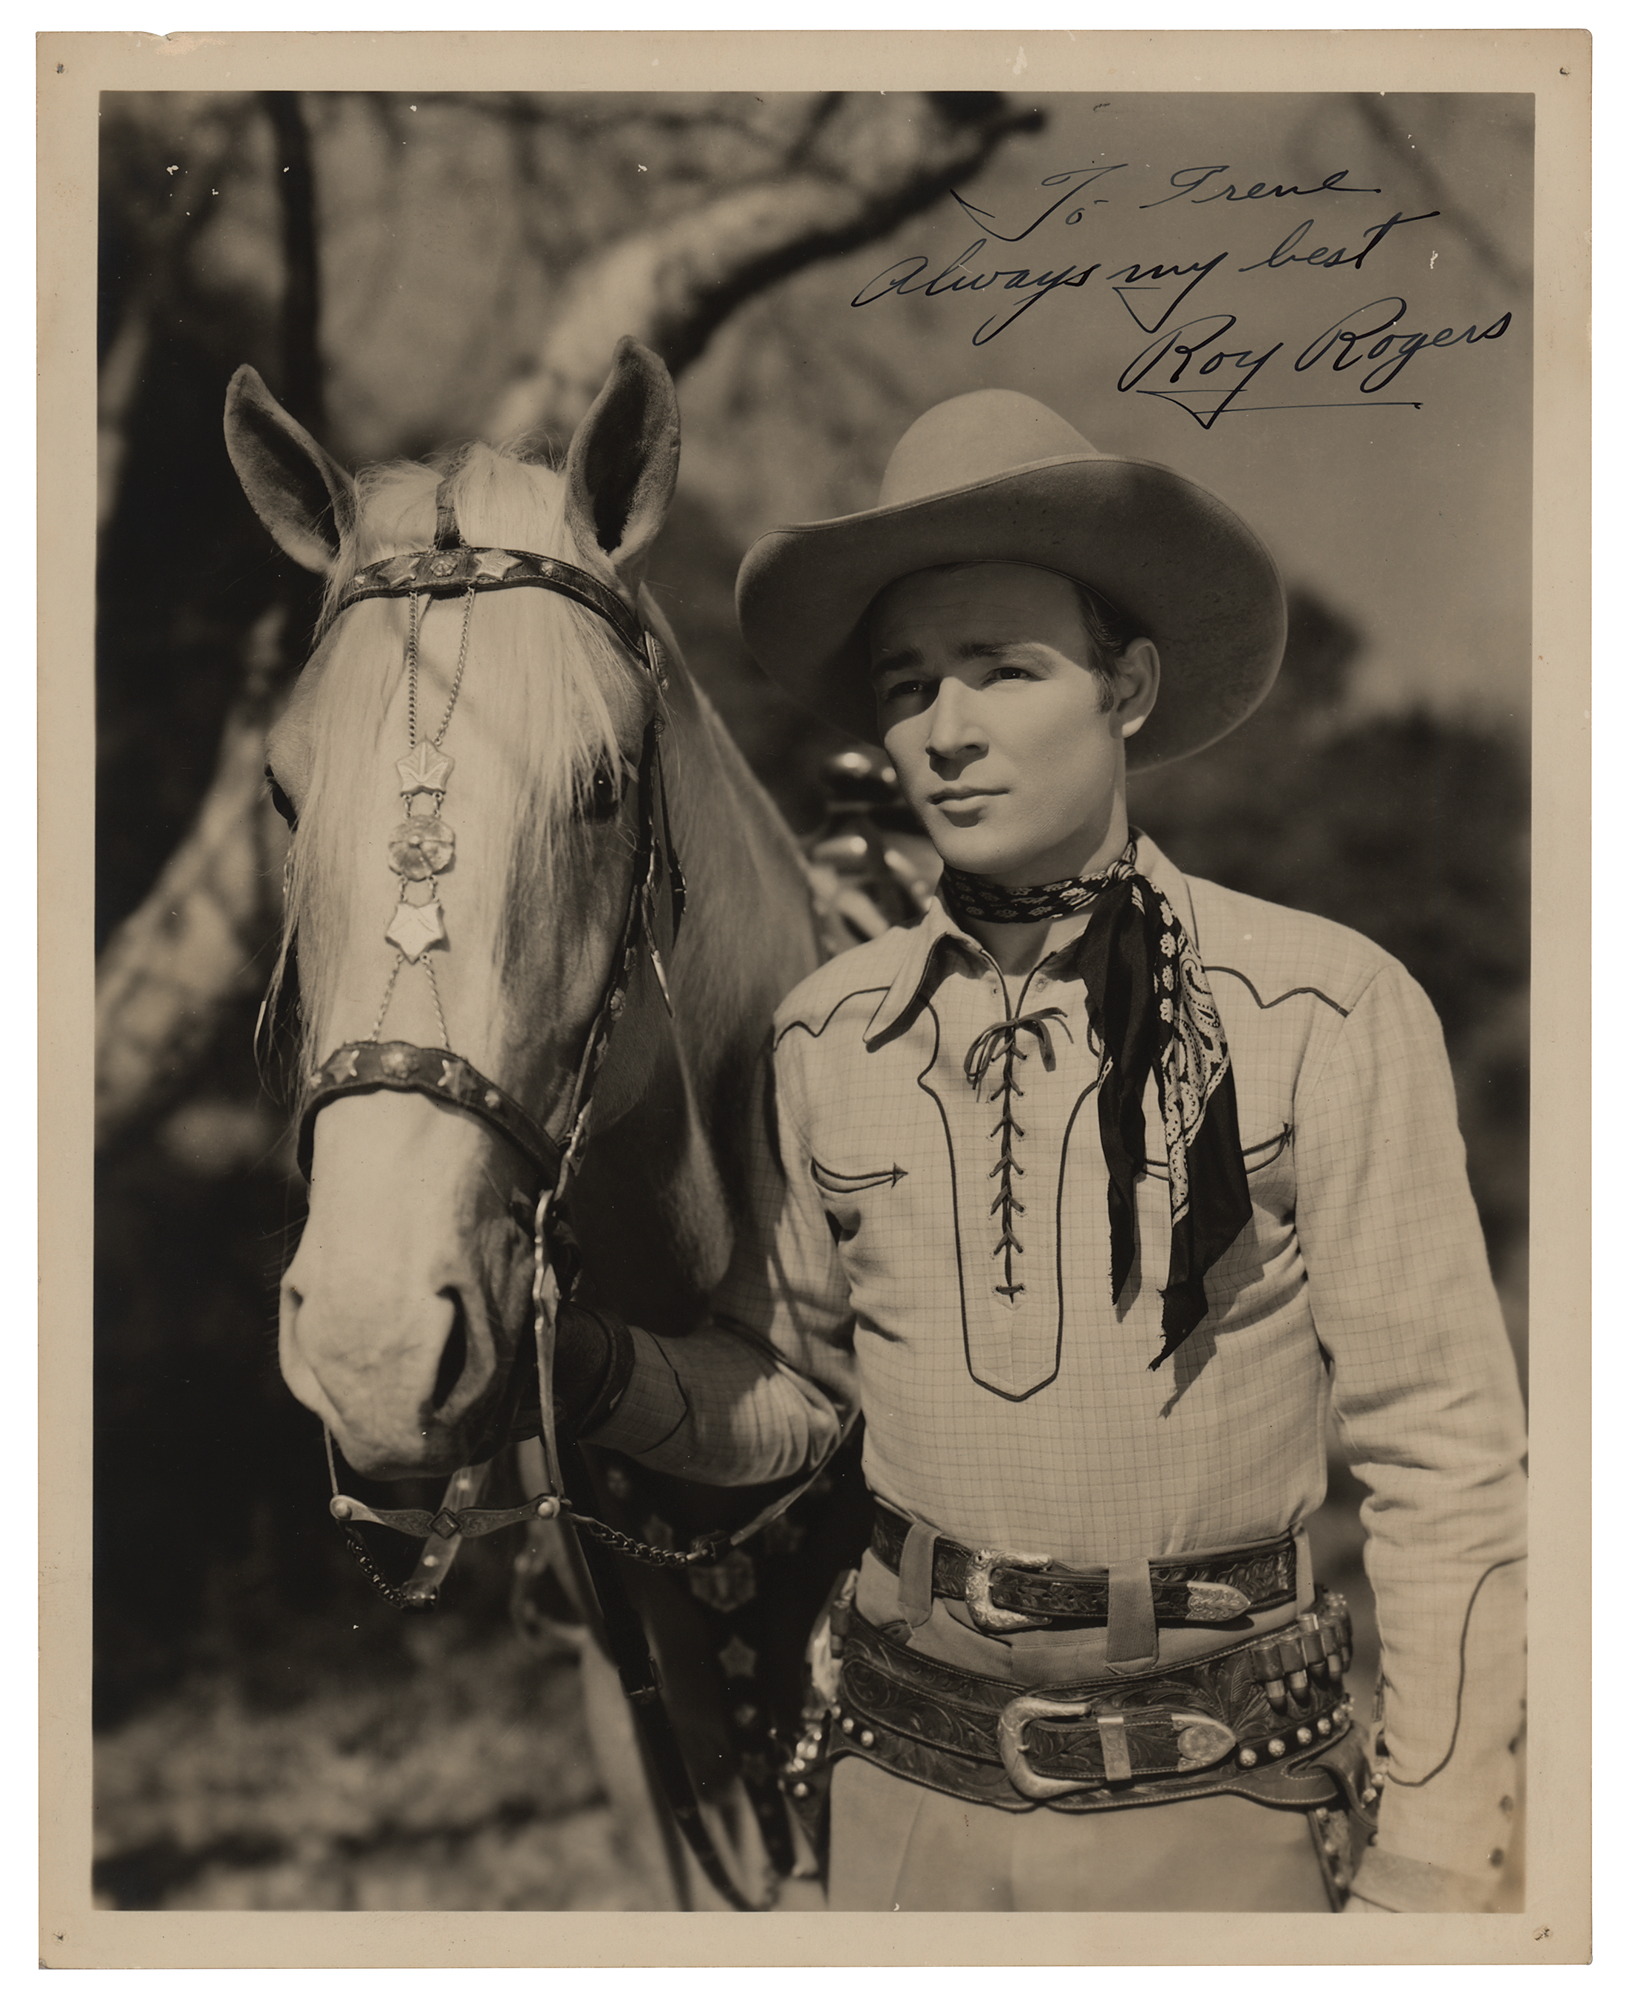 Roy Rogers Signed Photograph | RR Auction